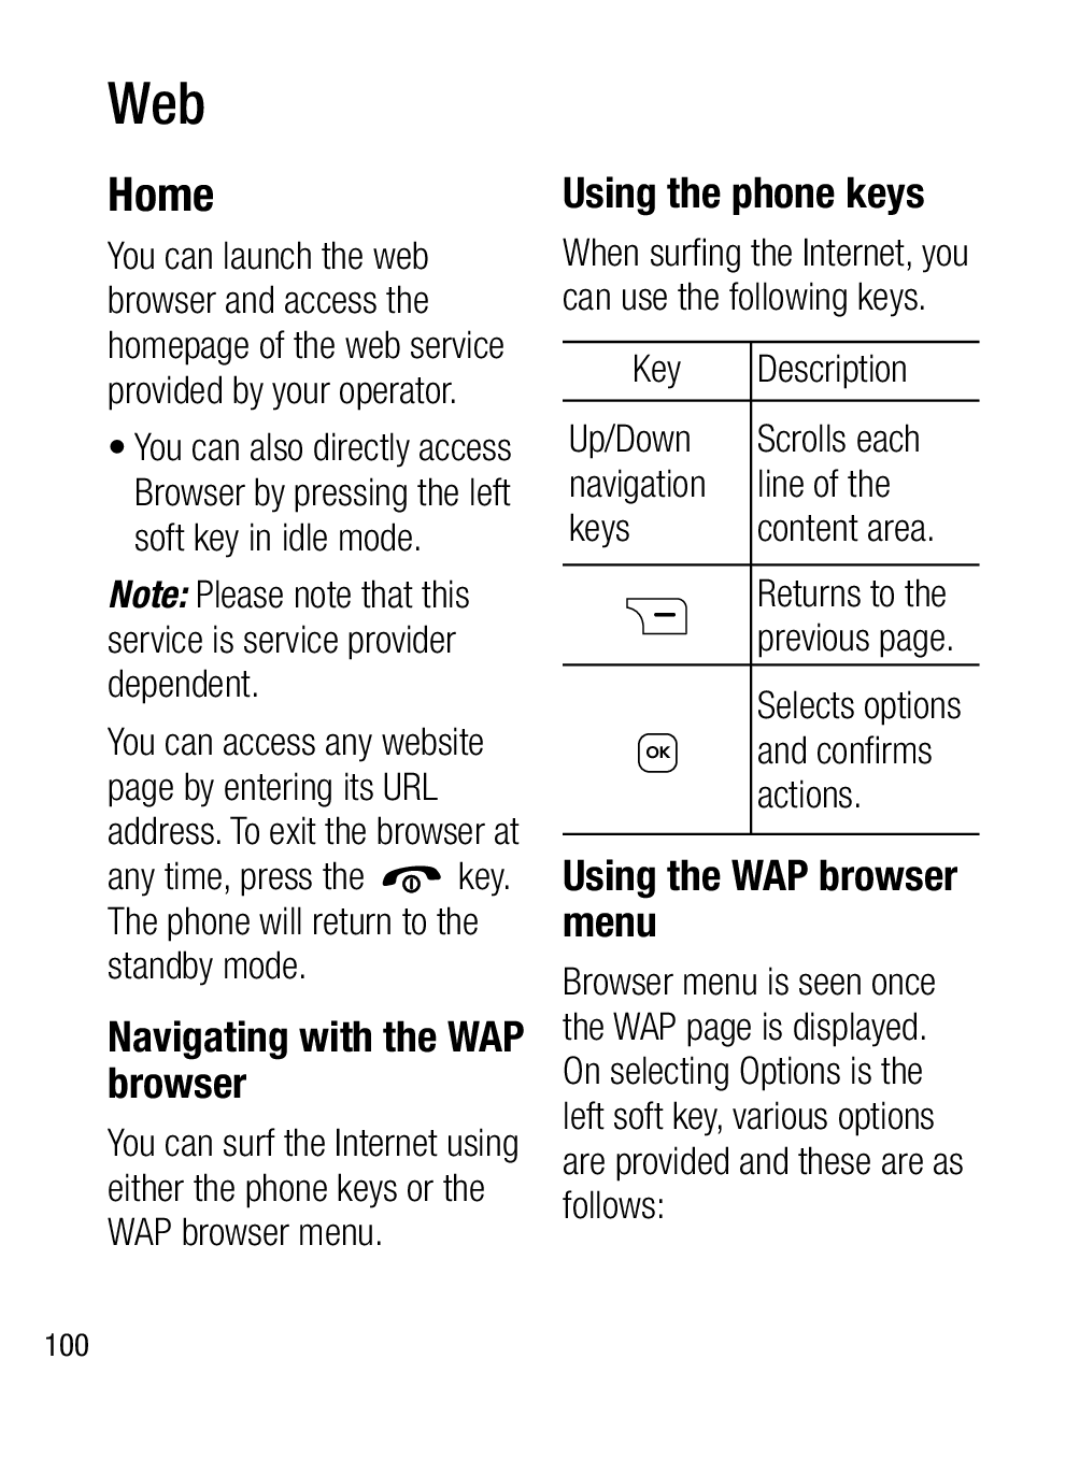 LG Electronics A133CH manual Home, Navigating with the WAP browser, Using the phone keys, Using the WAP browser menu 